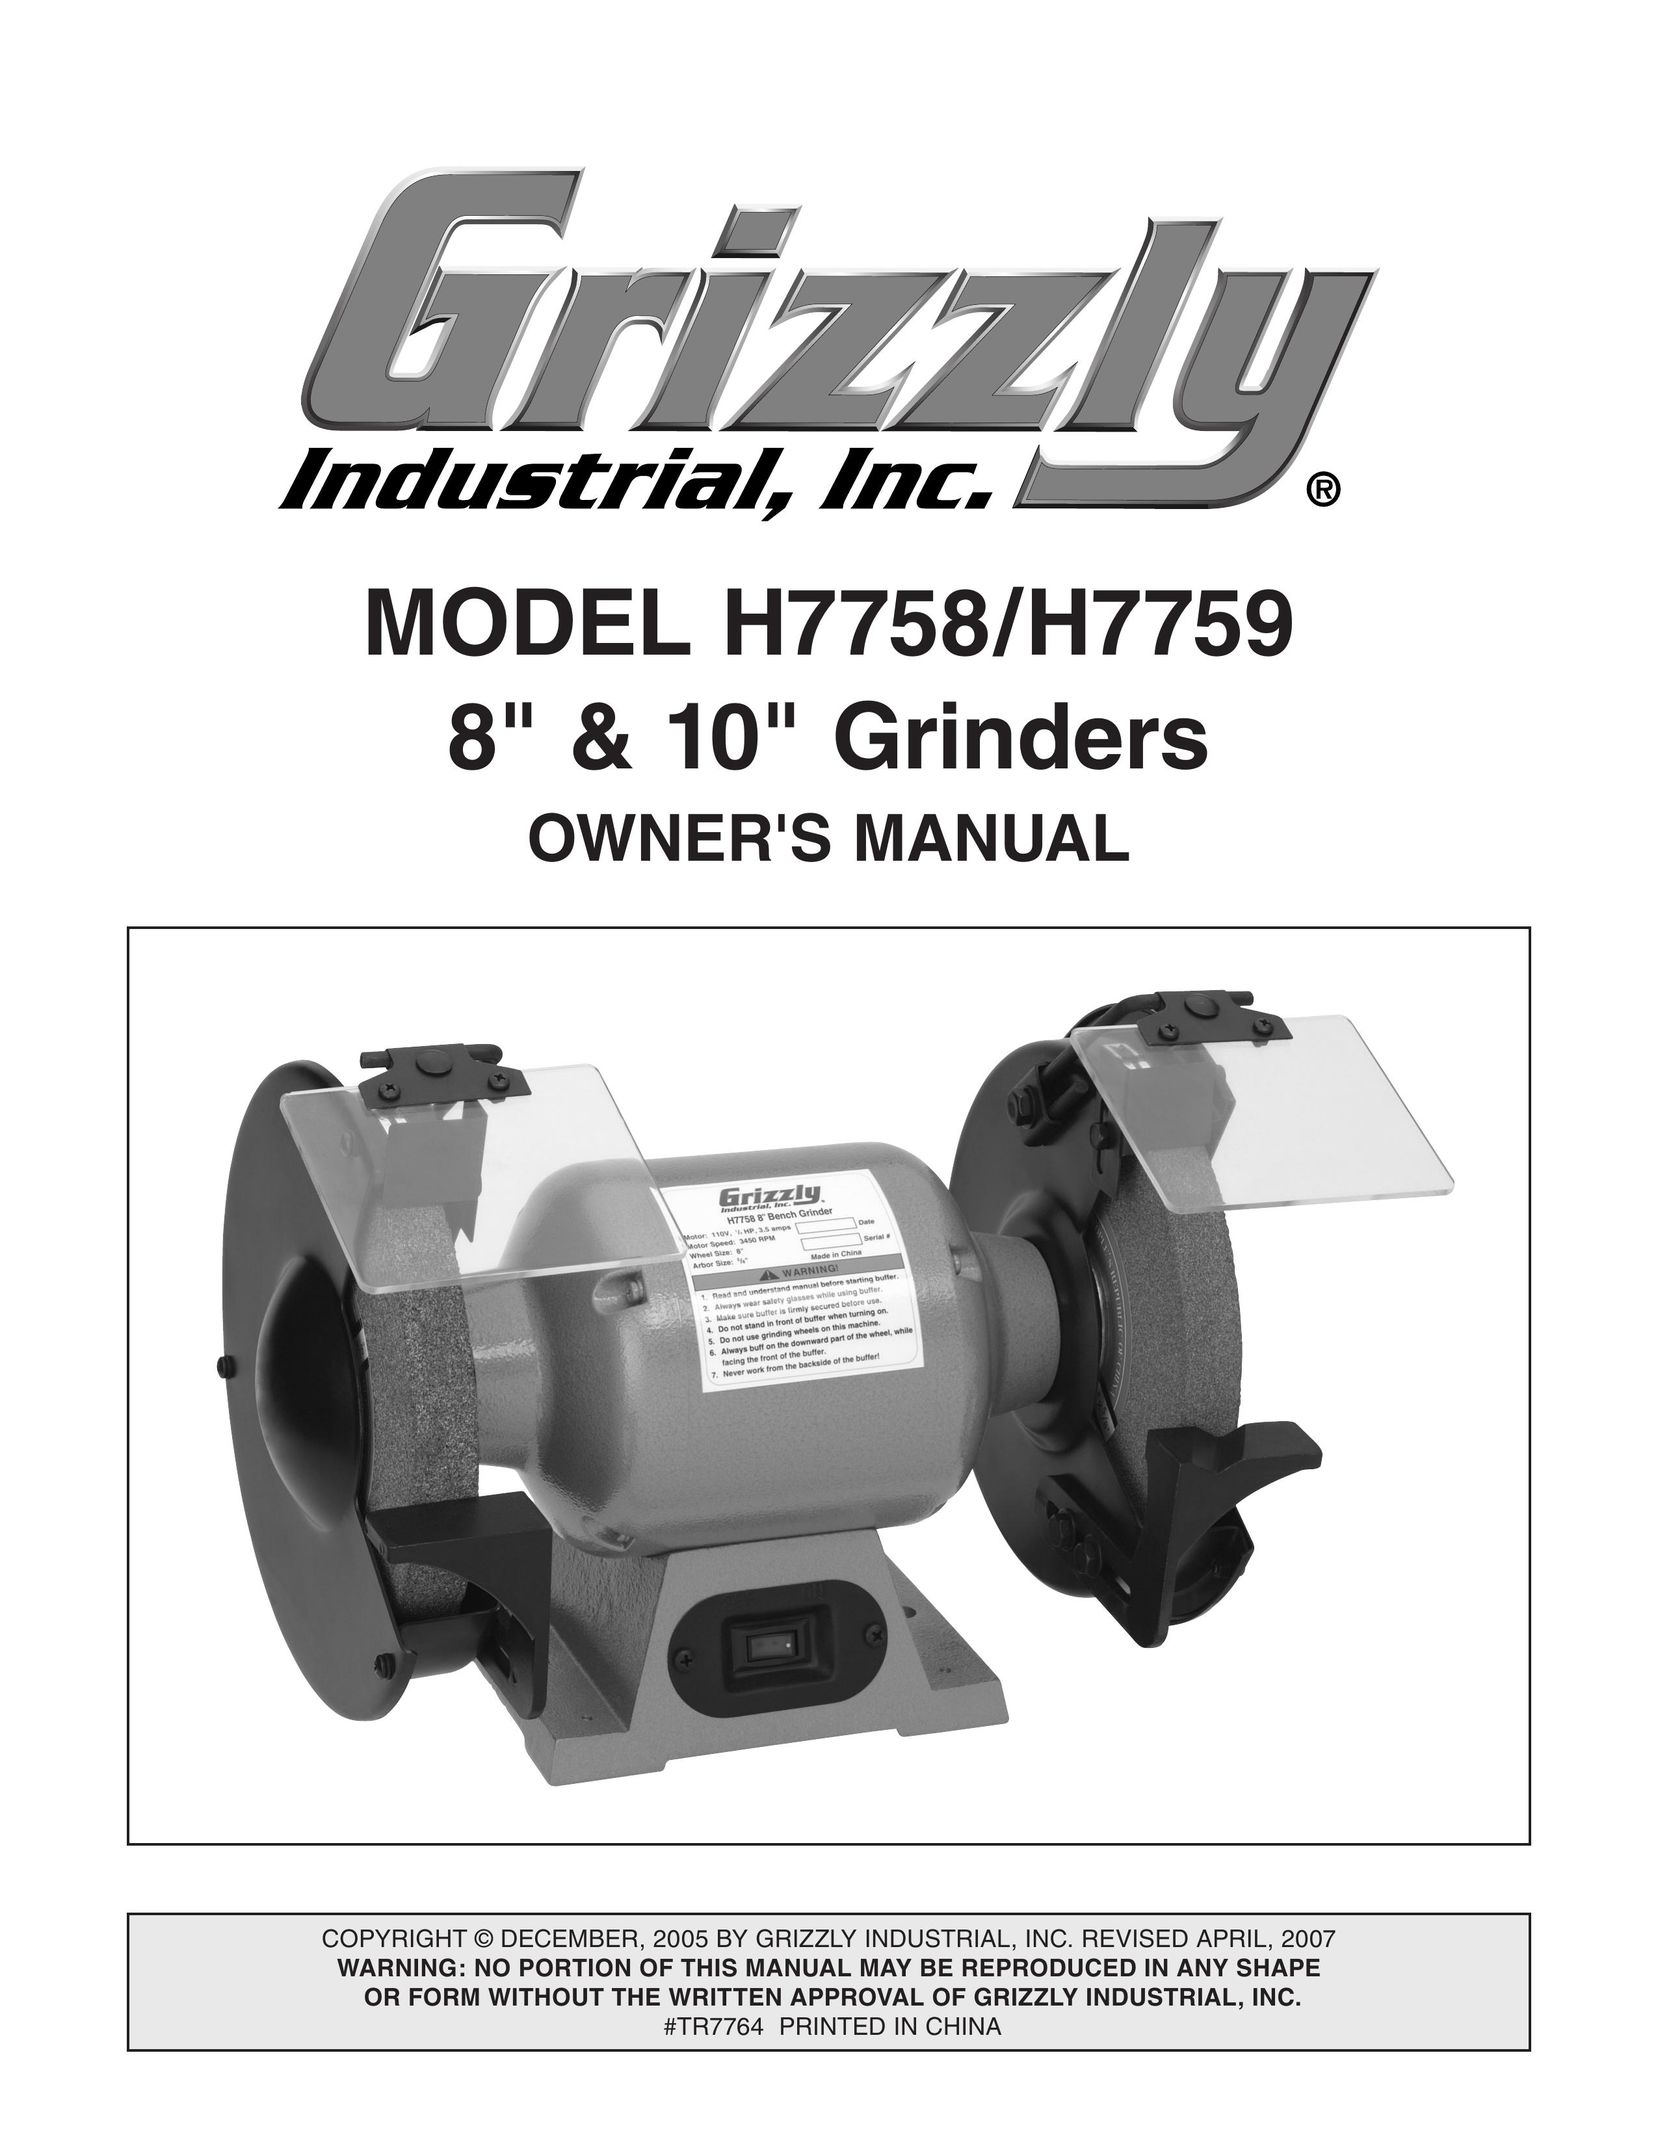 Grizzly H7758 Grinder User Manual